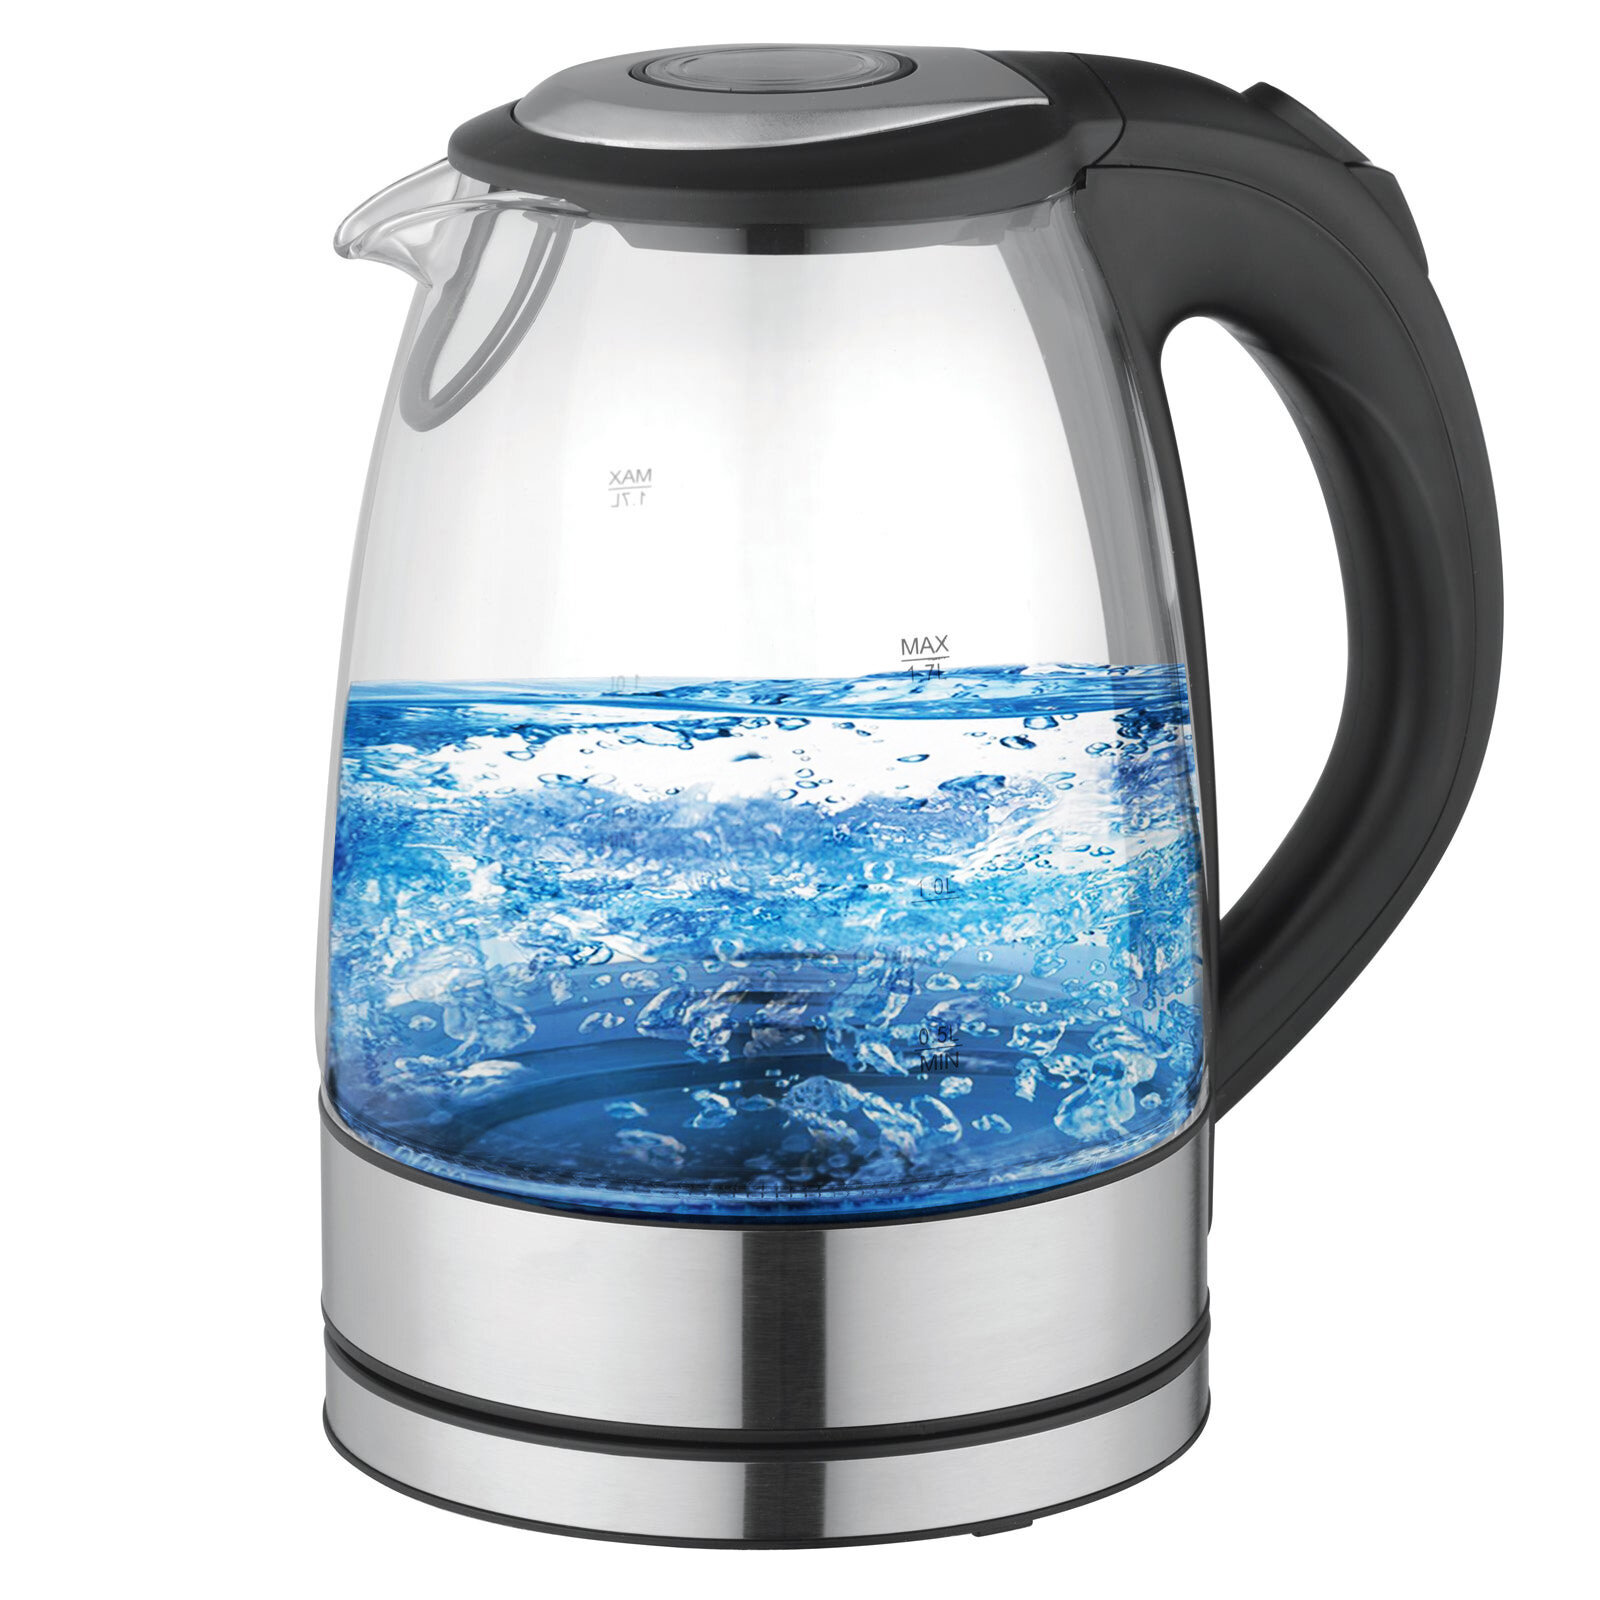 OVENTE 7.2-Cup White Stainless Steel Electric Kettle with